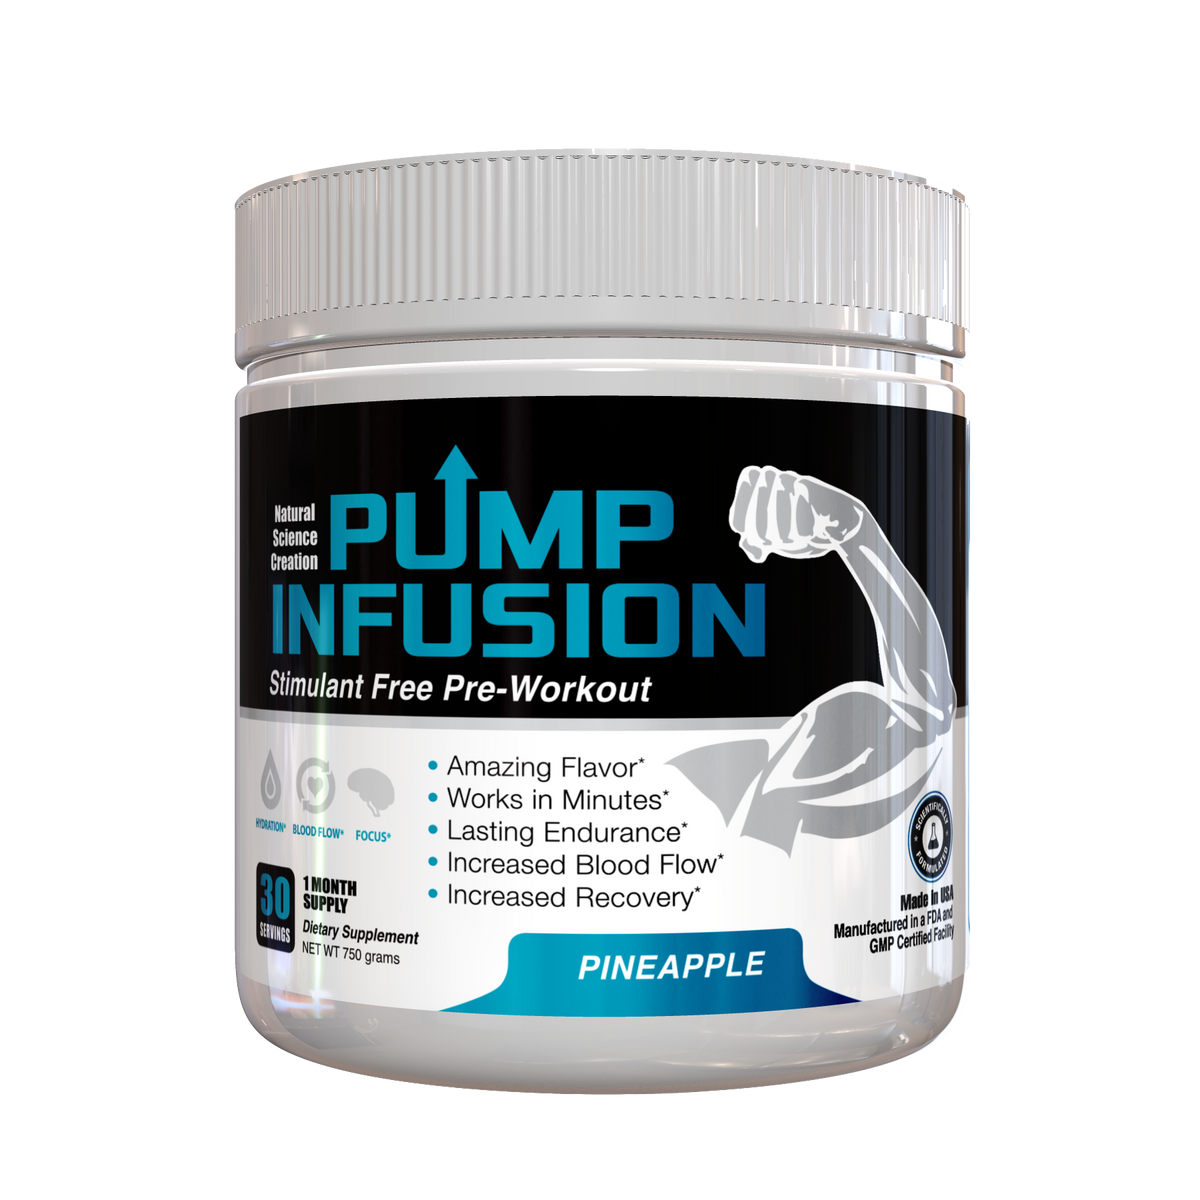 NEW! Pump Infusion Pineapple (Stimulant Pre-Workout)